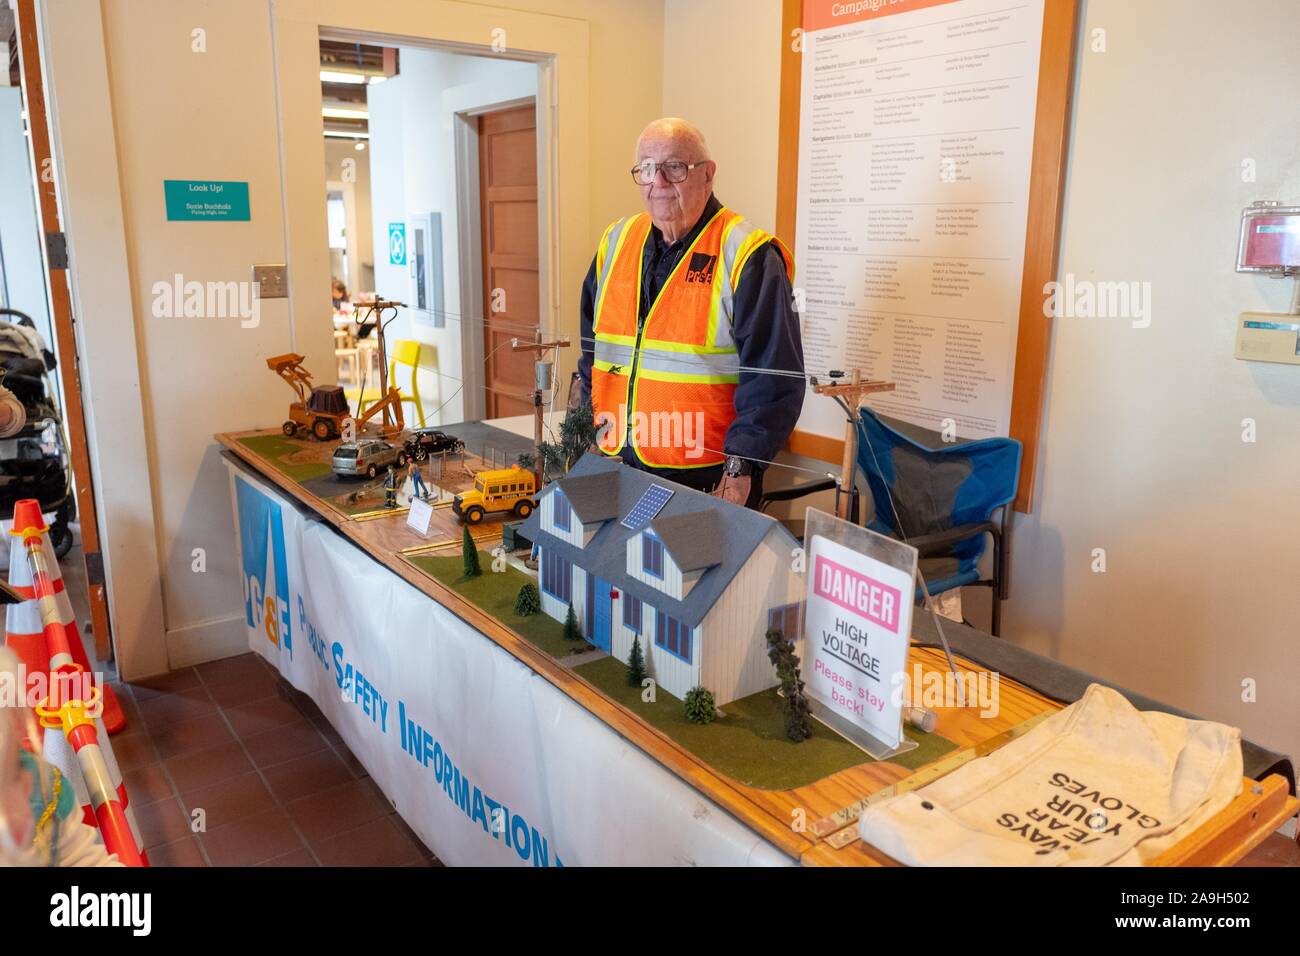 An employee of Pacific Gas and Electric Company (PGE) uses a diorama to demonstrate risks associated with electrical power lines during a public safety demonstration following the Public Safety Power Shutoff affecting the San Francisco Bay Area, Sausalito, California, October 19, 2019. () Stock Photo